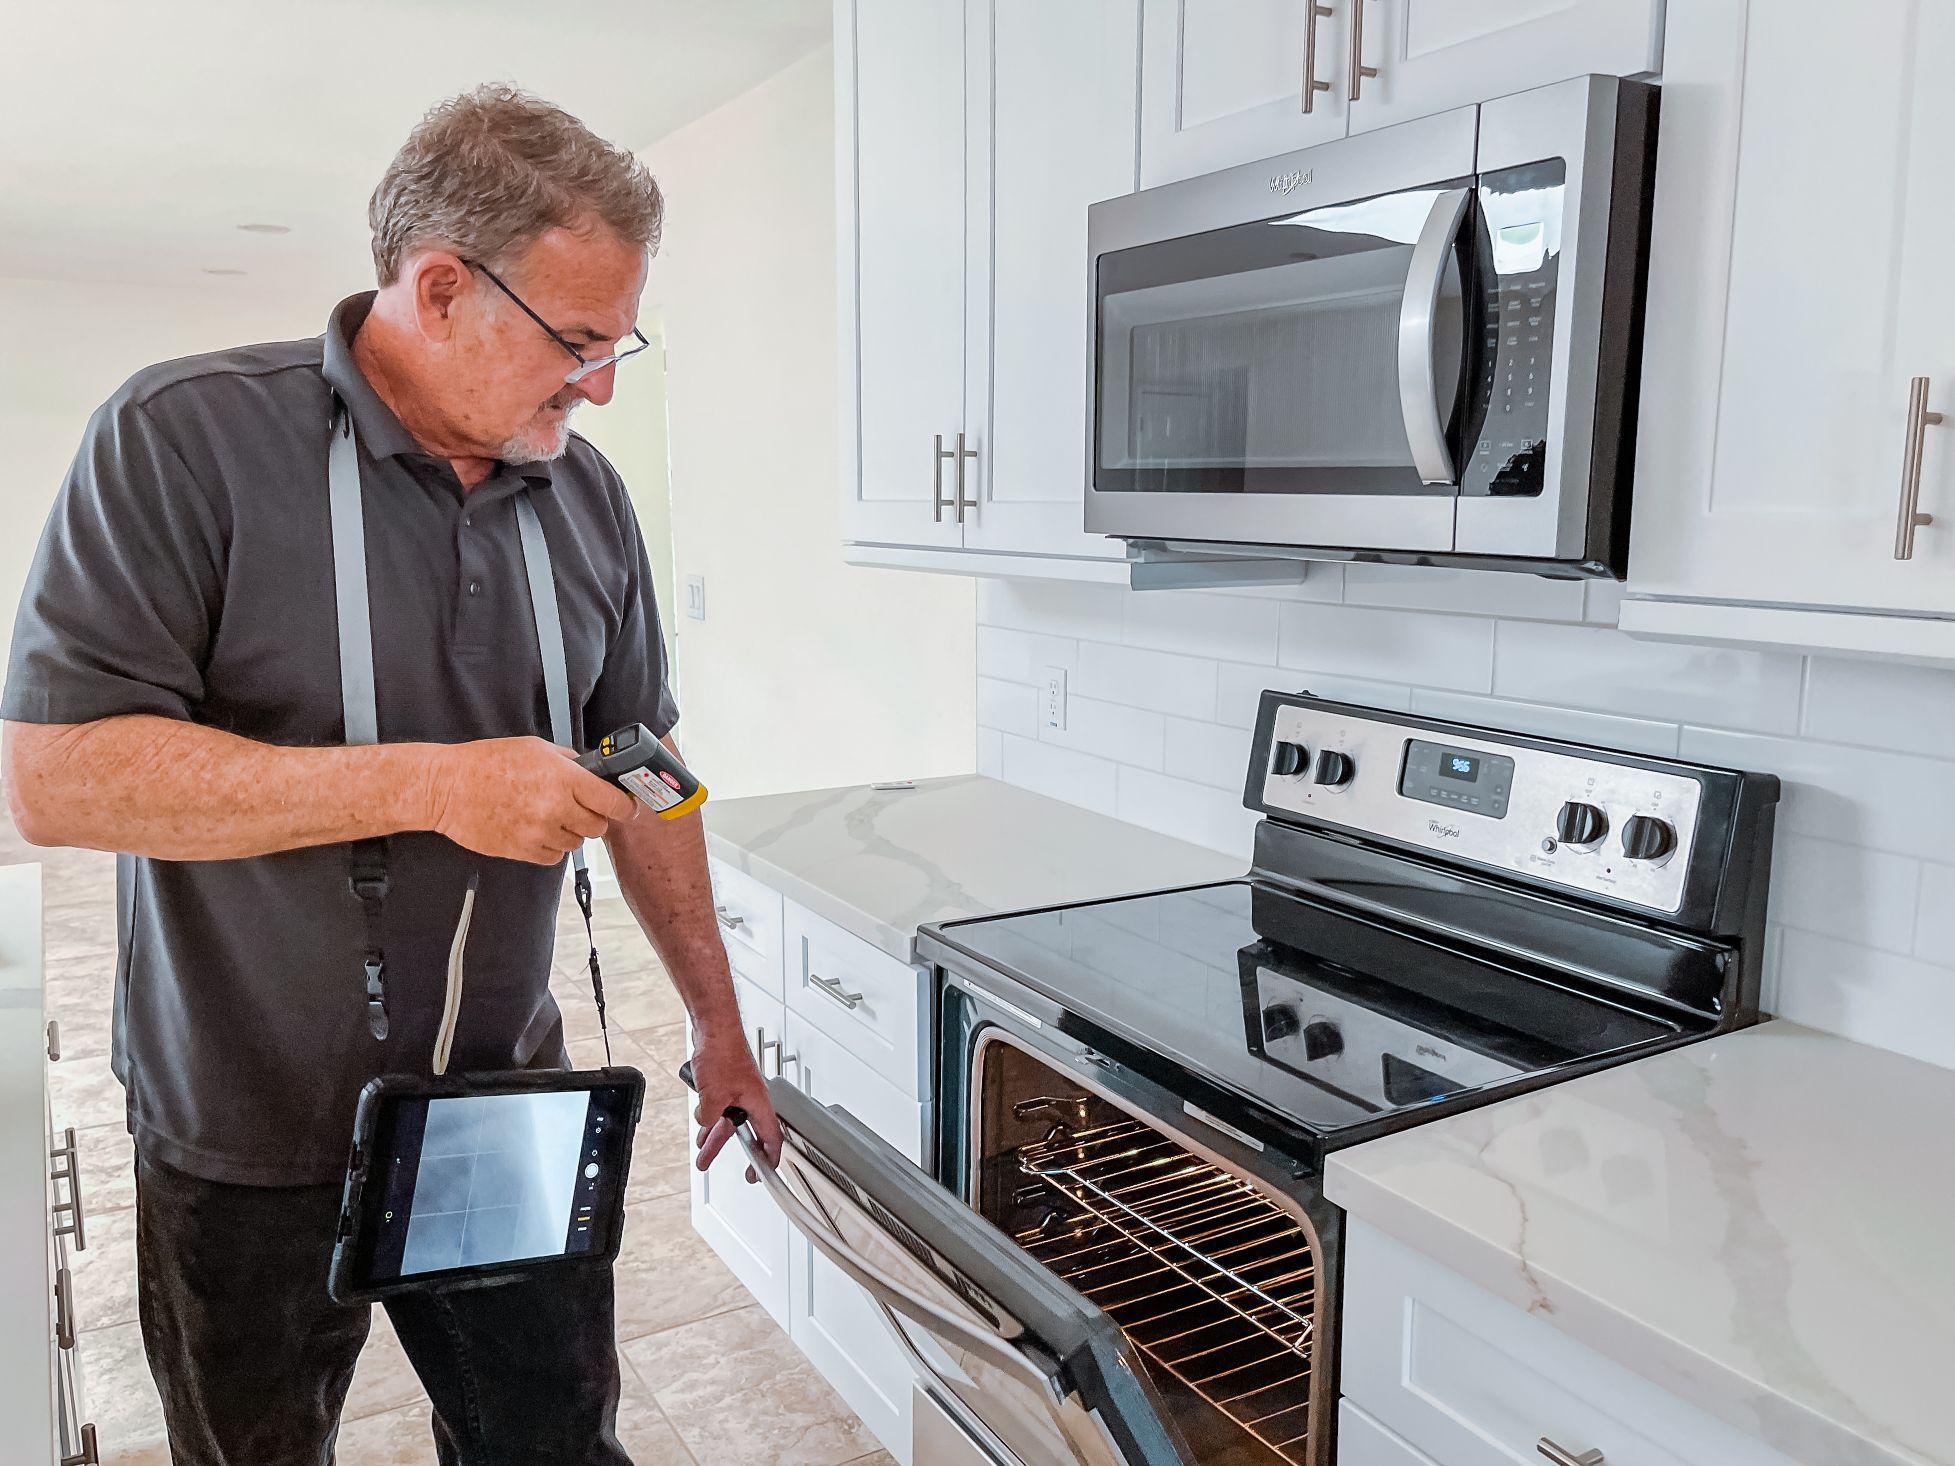 Jeff Hunter of Hunter Home Inspections inspects the oven temperature to ensure it's working correctly.